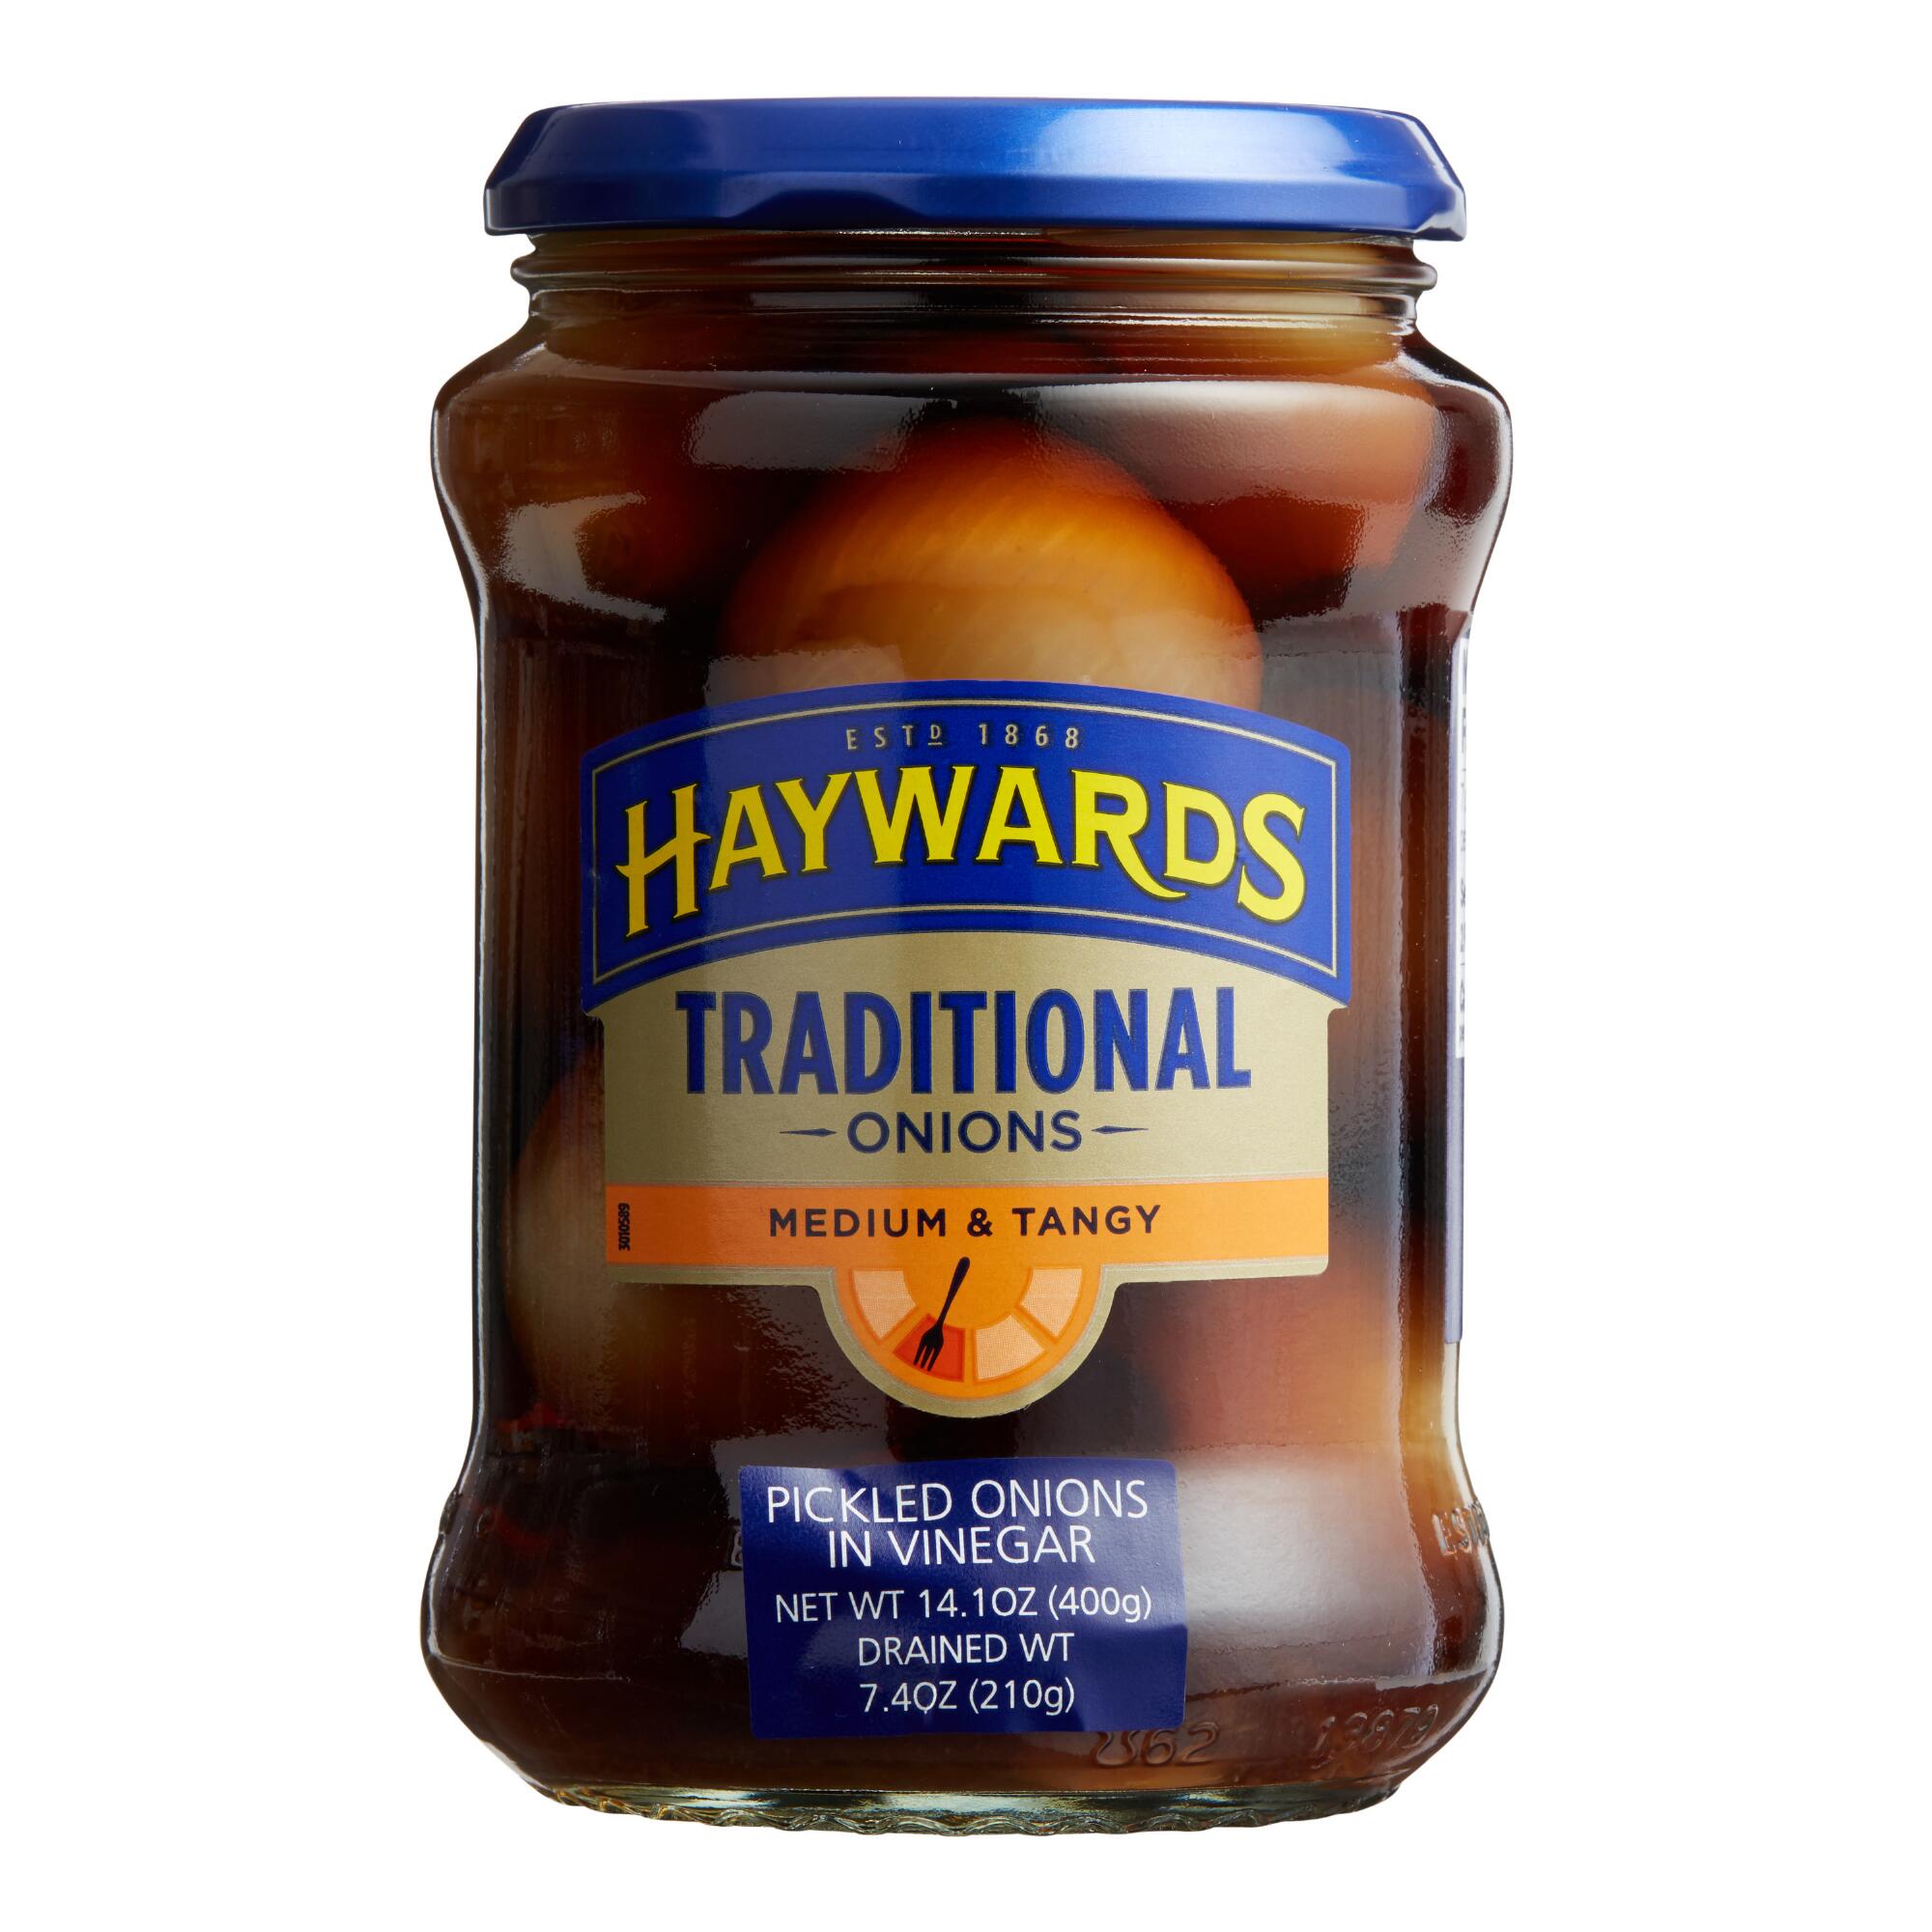 Haywards Medium and Tangy Traditional Onions by World Market